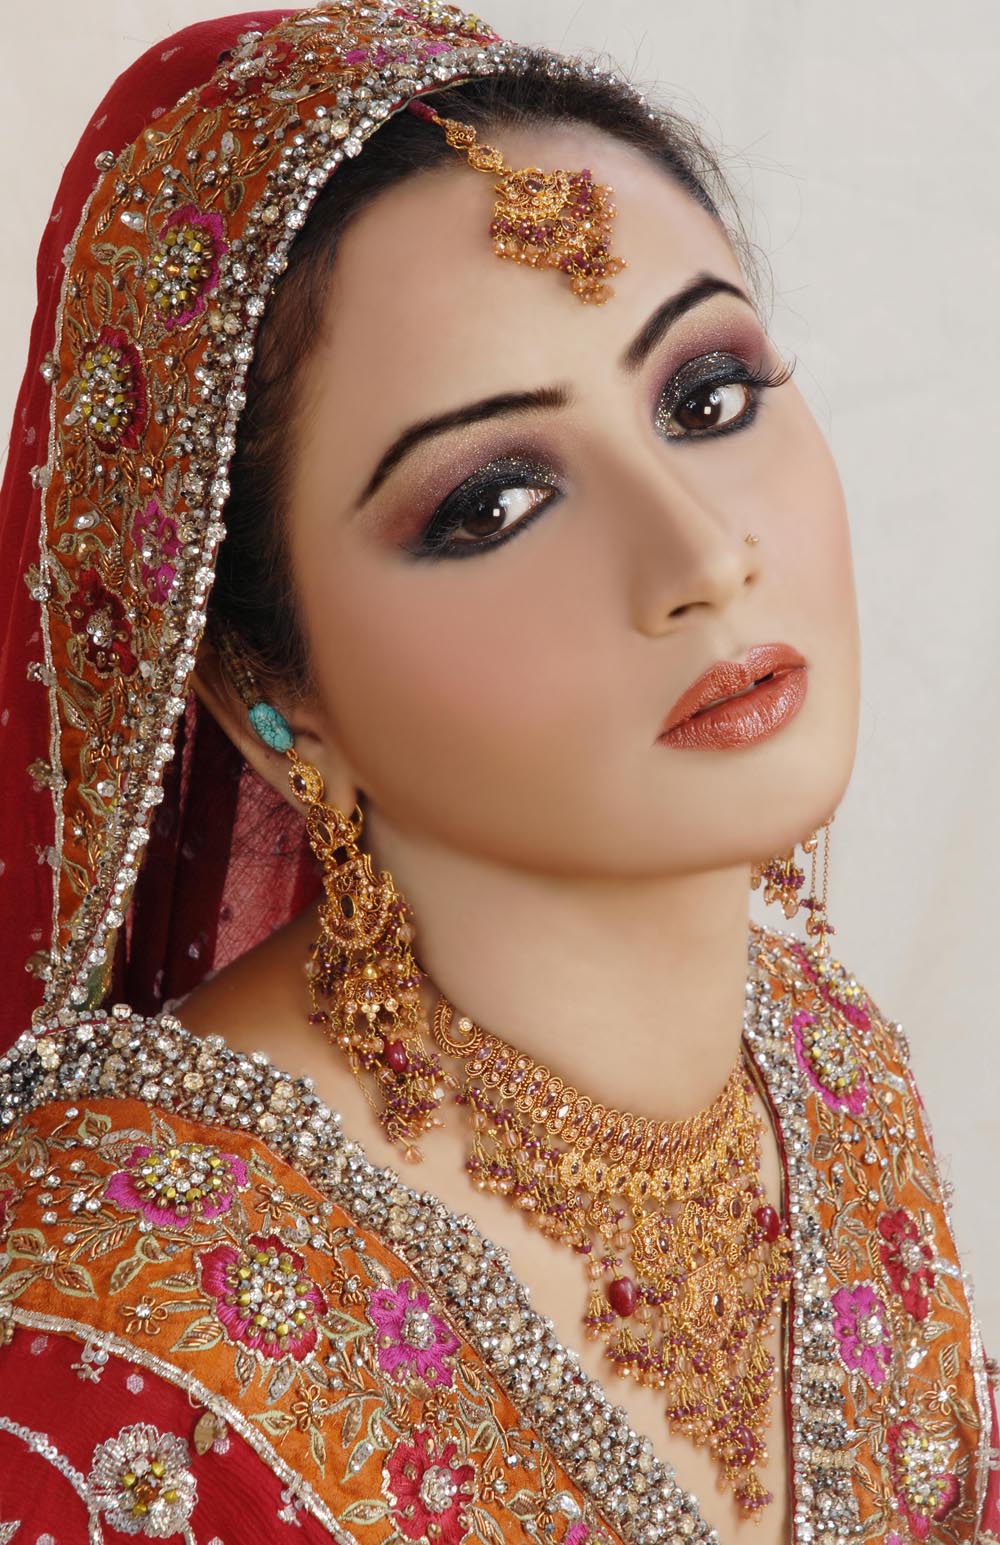 Bridal Makeup Tips For Brides On Their Wedding Day